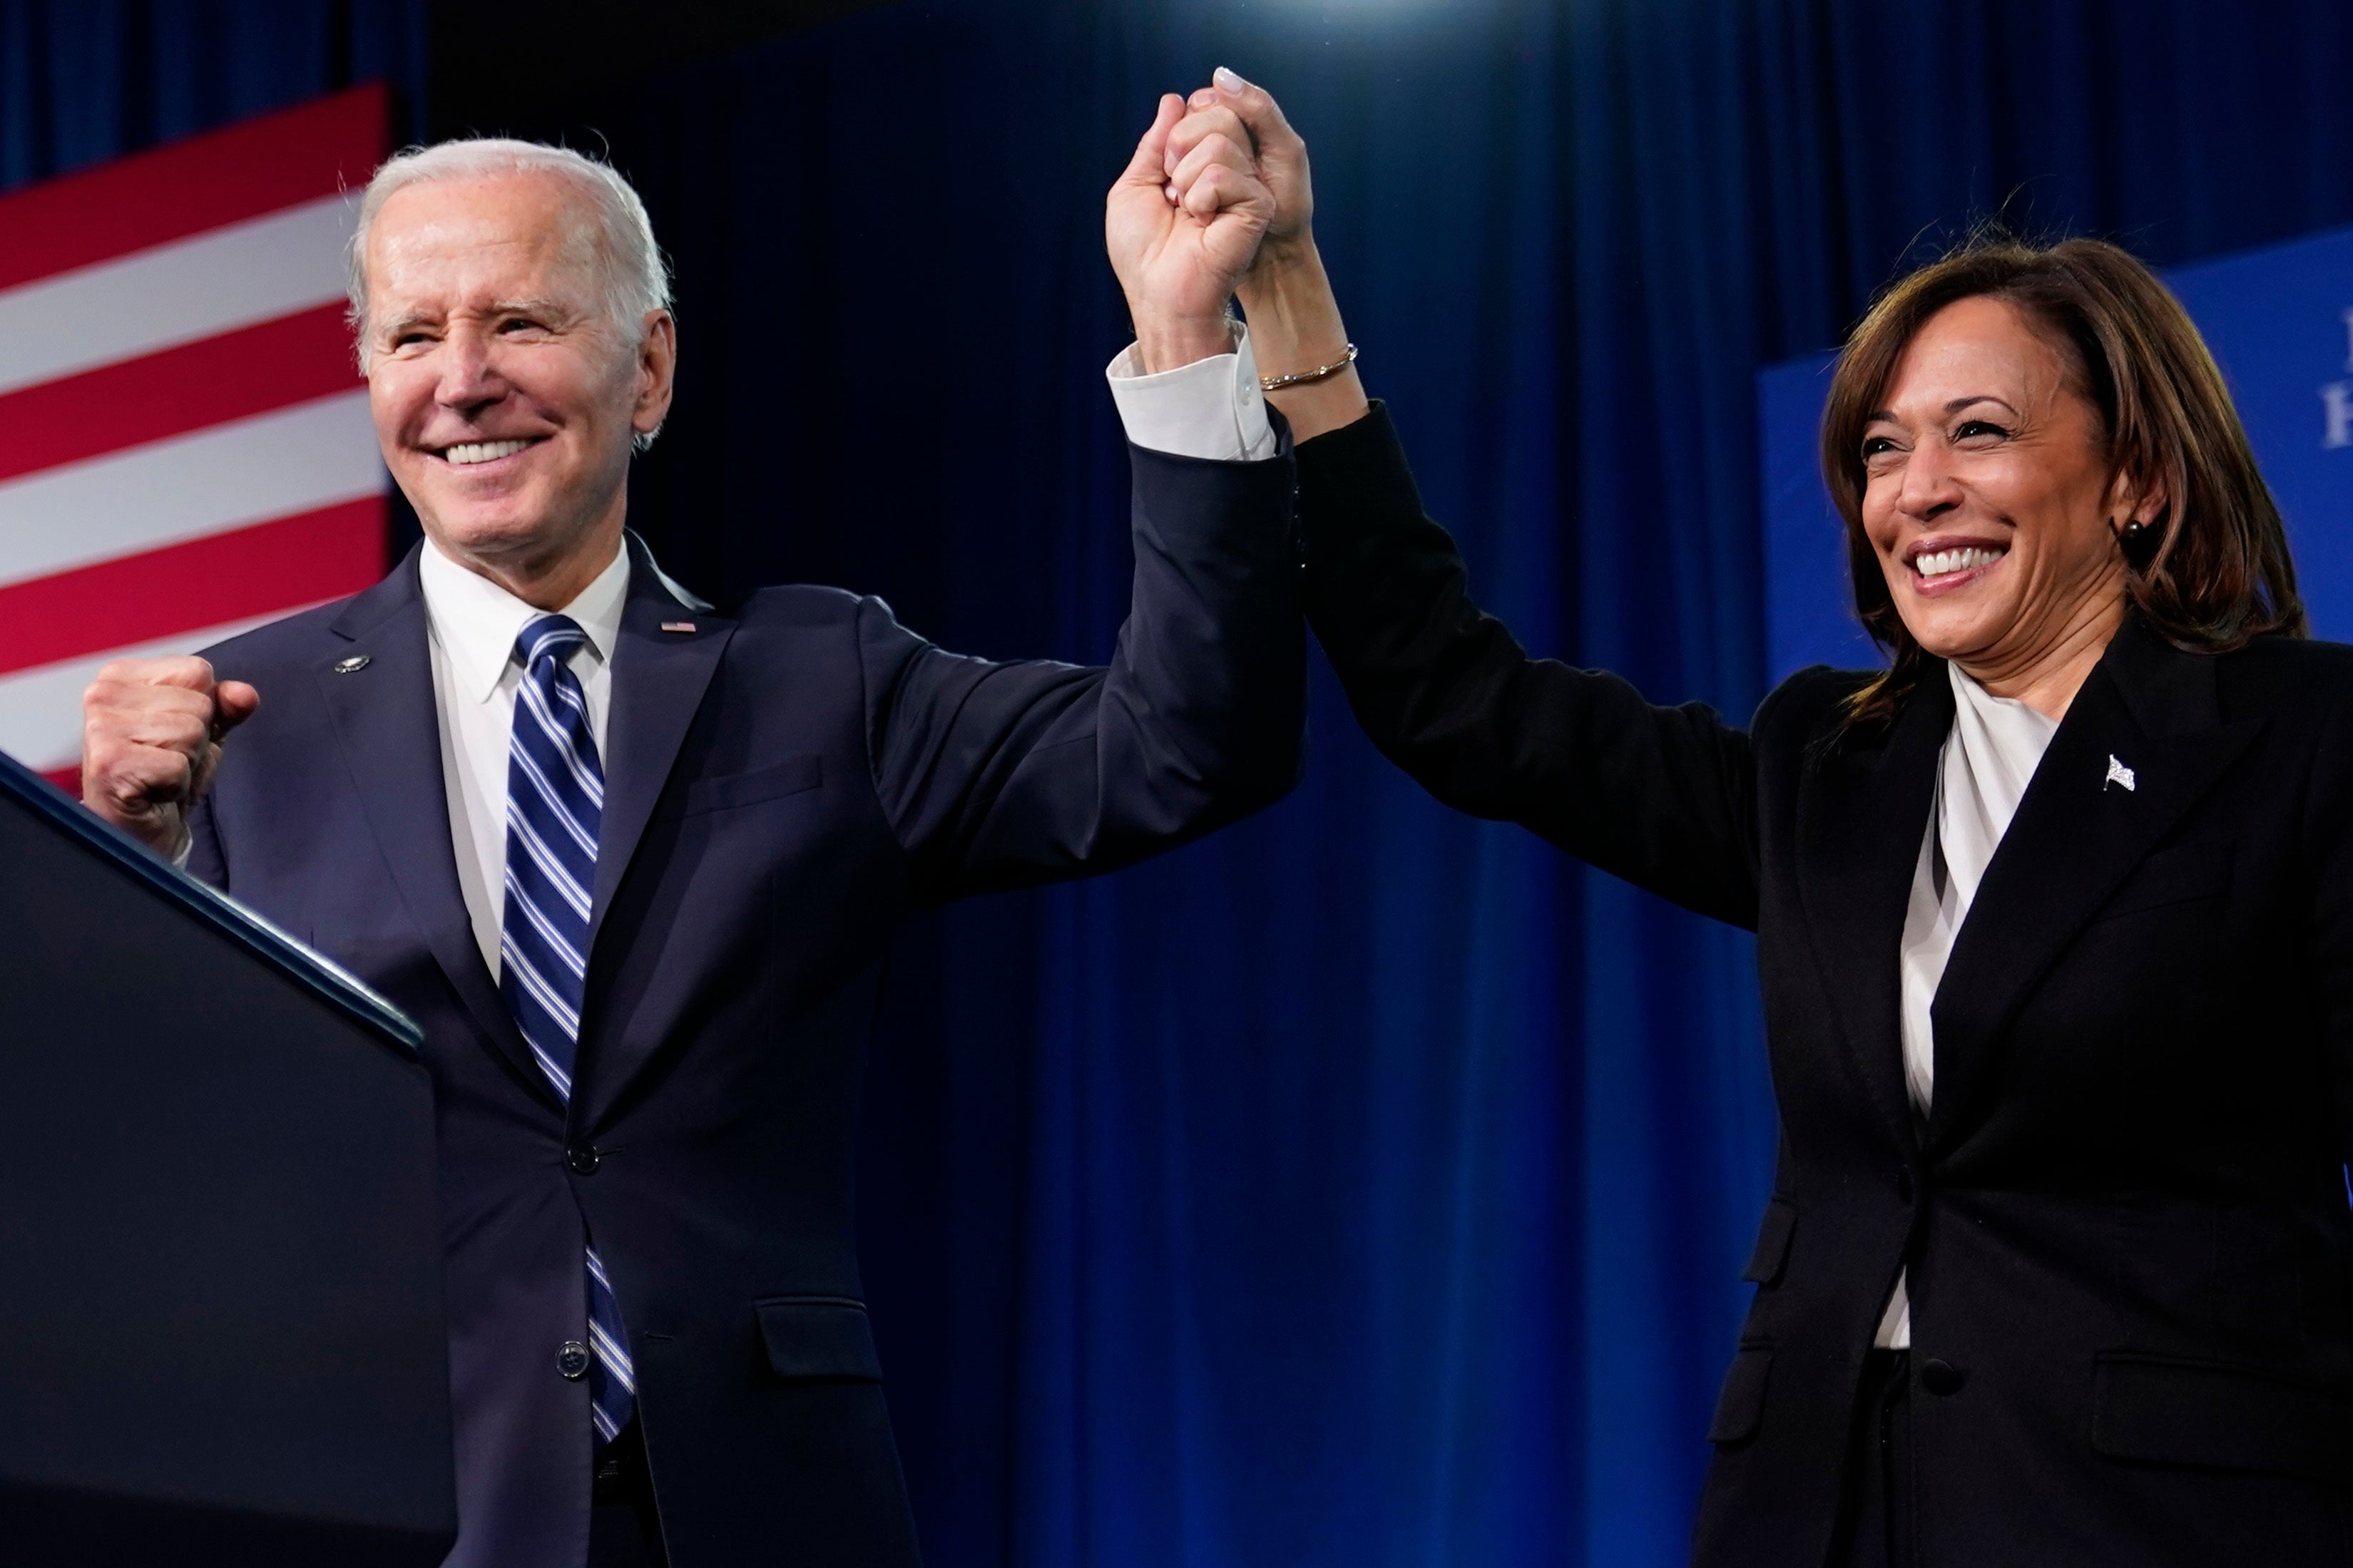 Harris would come to the top of a hypothetical post-Biden ticket with substantial support from key Democrats.